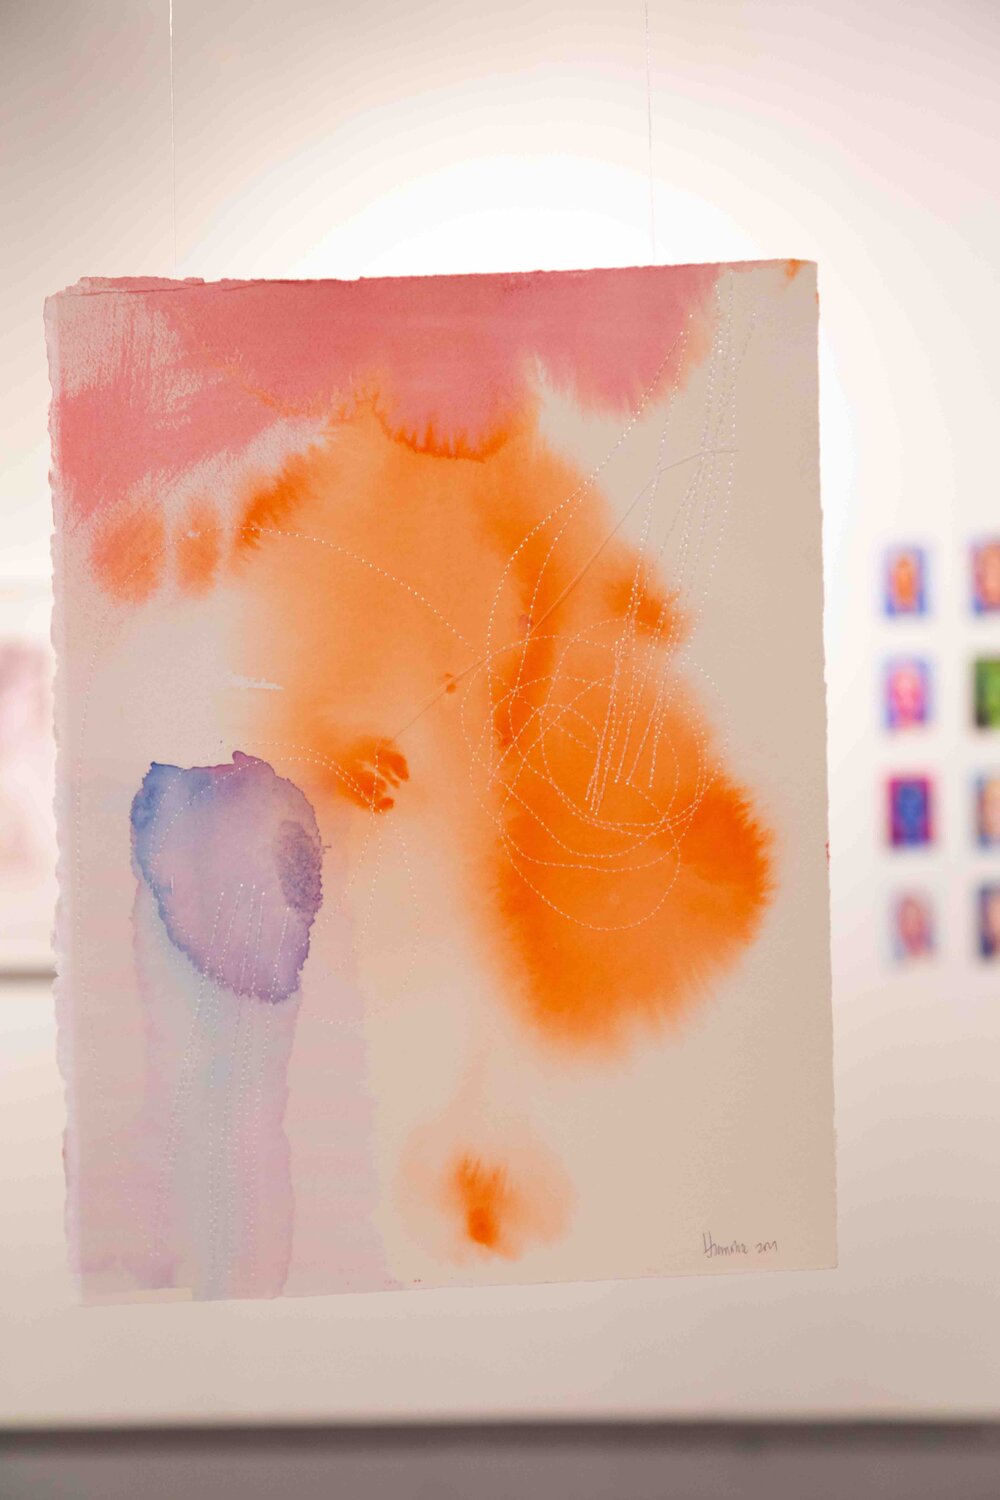 Genzah Stitched Abstract Watercolour Collage Creamsicle Jessica Hiemstra Photo by Paul Esposti.jpg